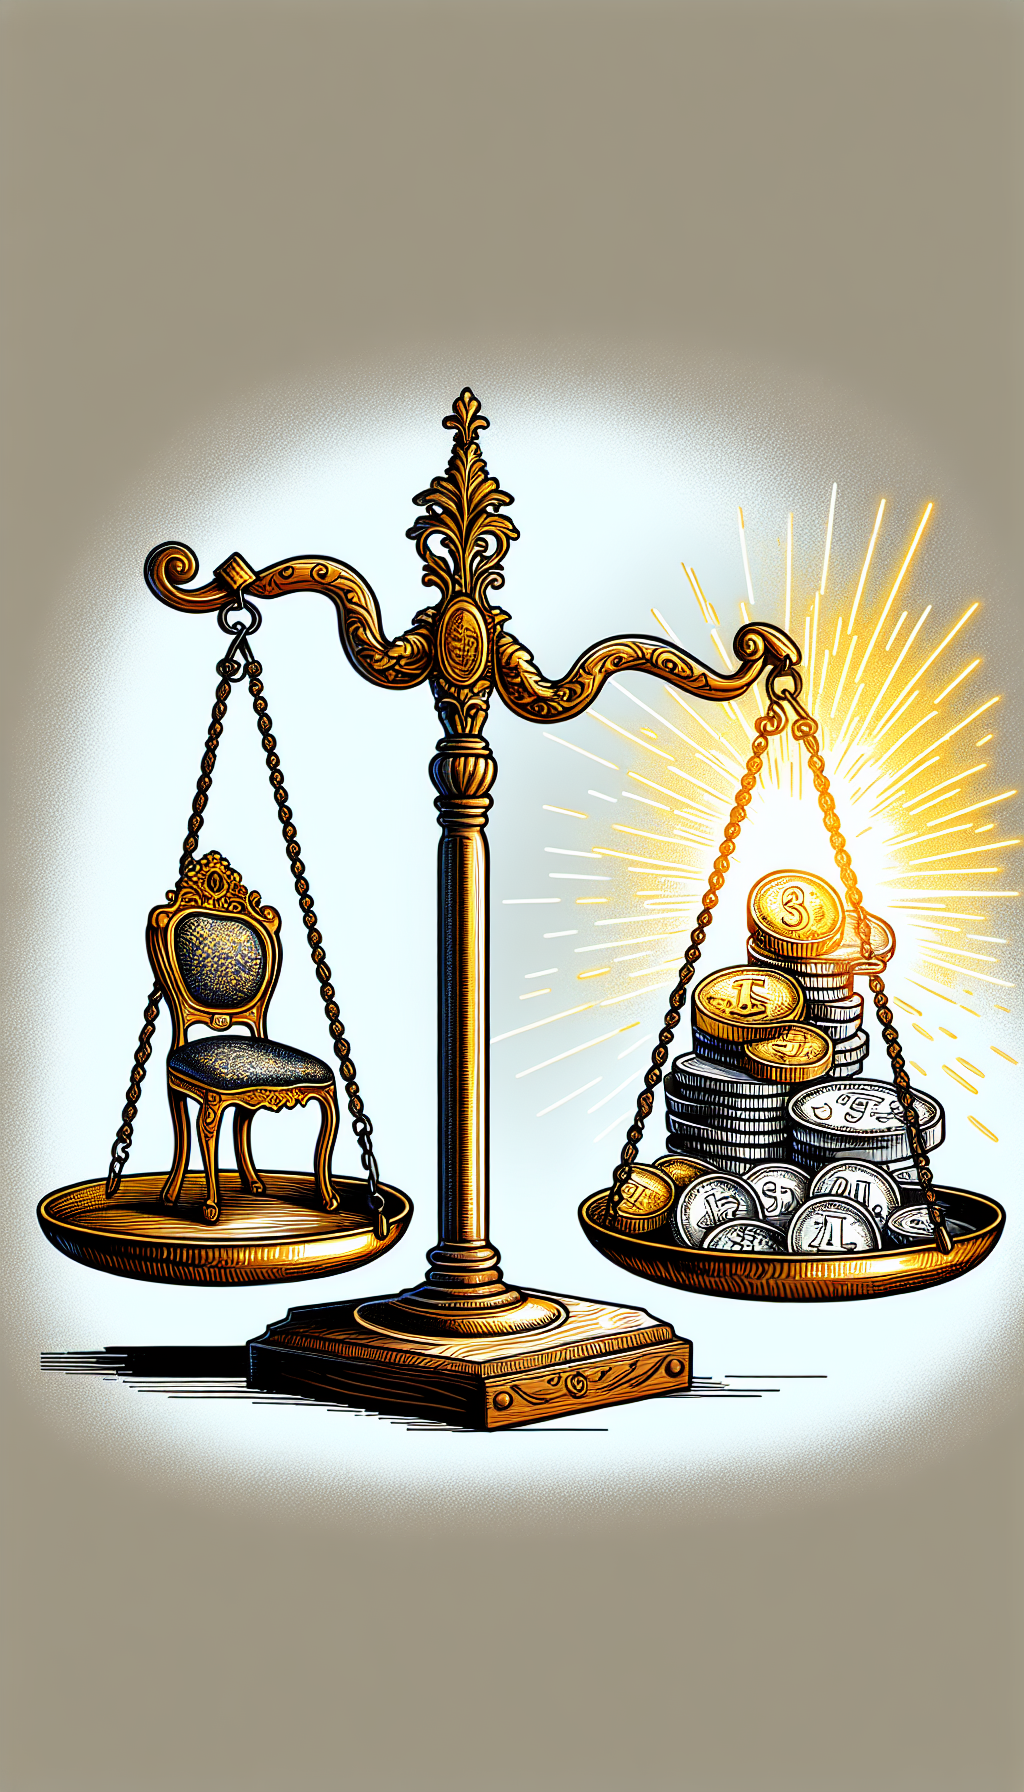 A whimsical balance scale with one side holding a pristine antique chair radiating a golden glow (symbolizing high authenticity and condition), while the other side has a stack of vintage coins and currency (indicating value). The balance tilts favorably towards the chair, illustrating that superior condition and authenticity weigh more in determining antique furniture values. Each object is drawn in contrasting styles – the chair in intricate line art, the currency in bold, colorful pop art.